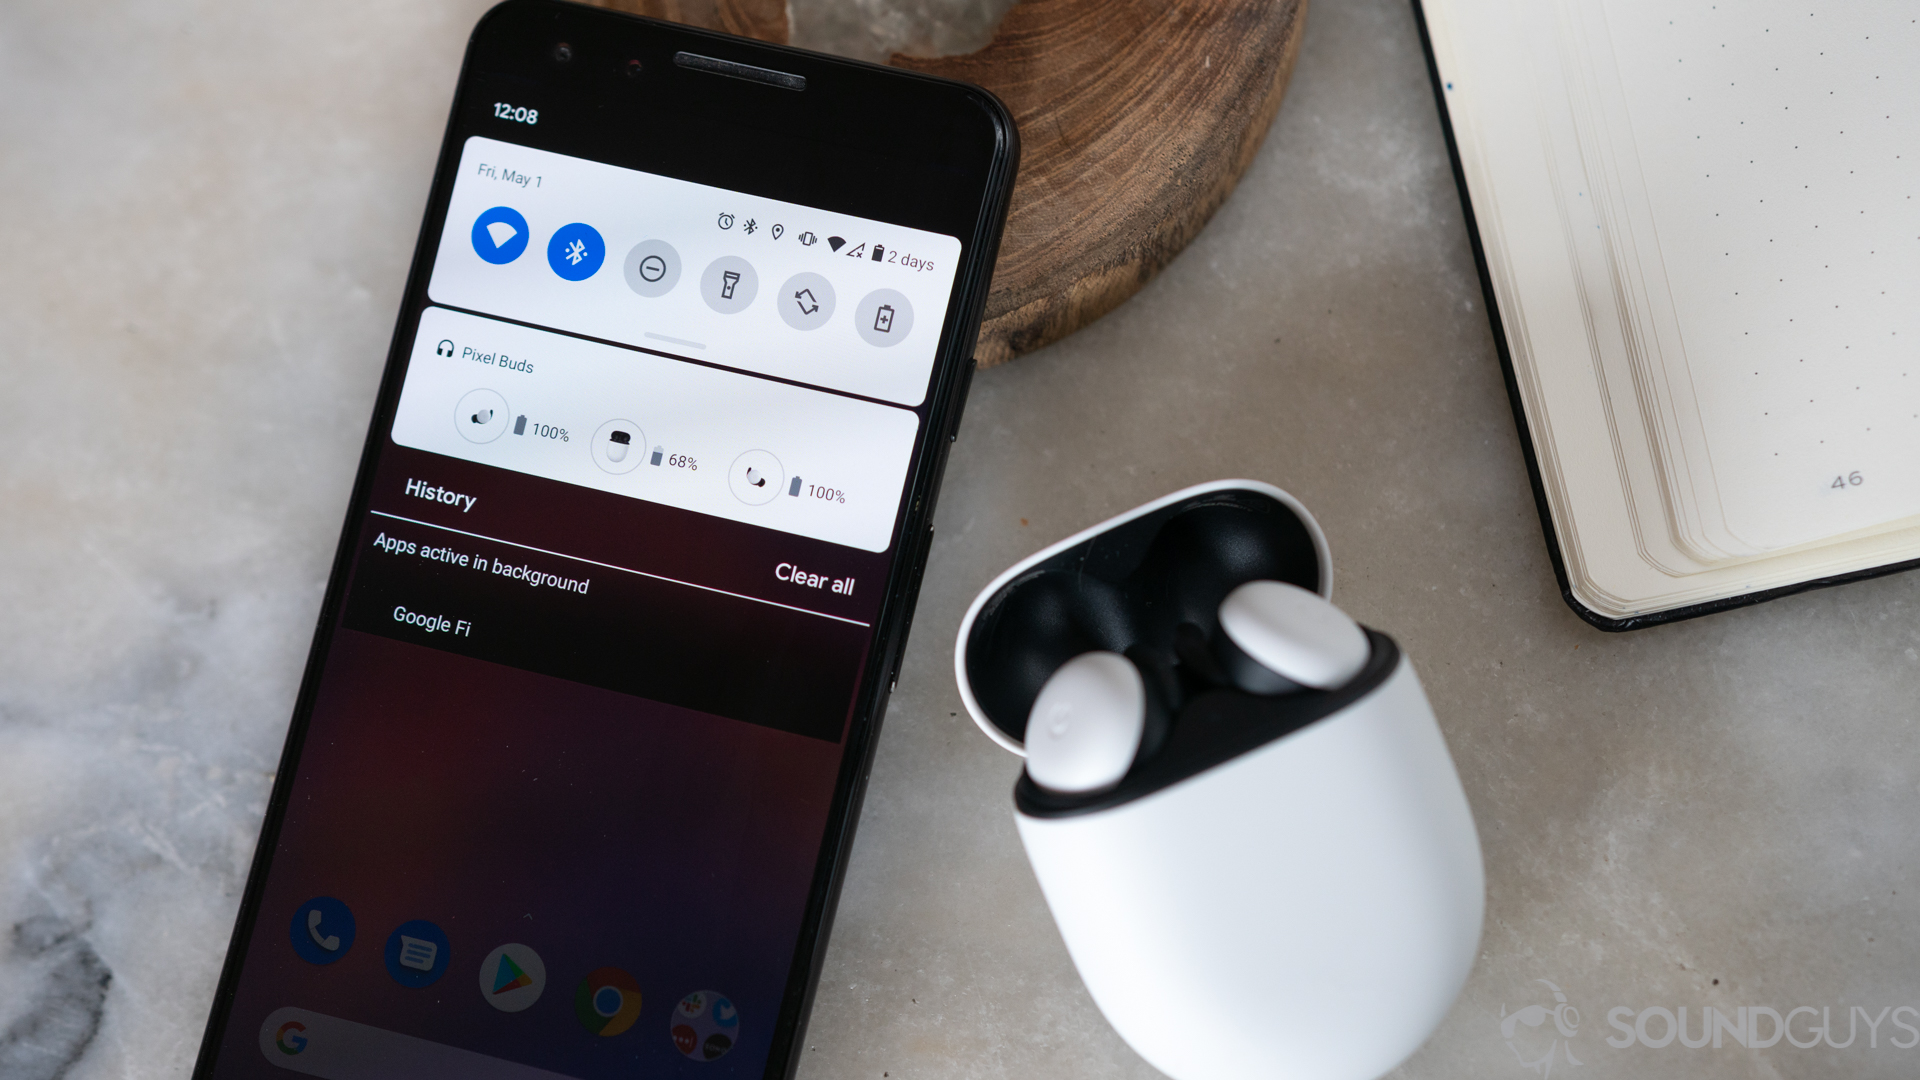 Google Pixel Buds Take on AirPods and Echo Buds Despite Premium